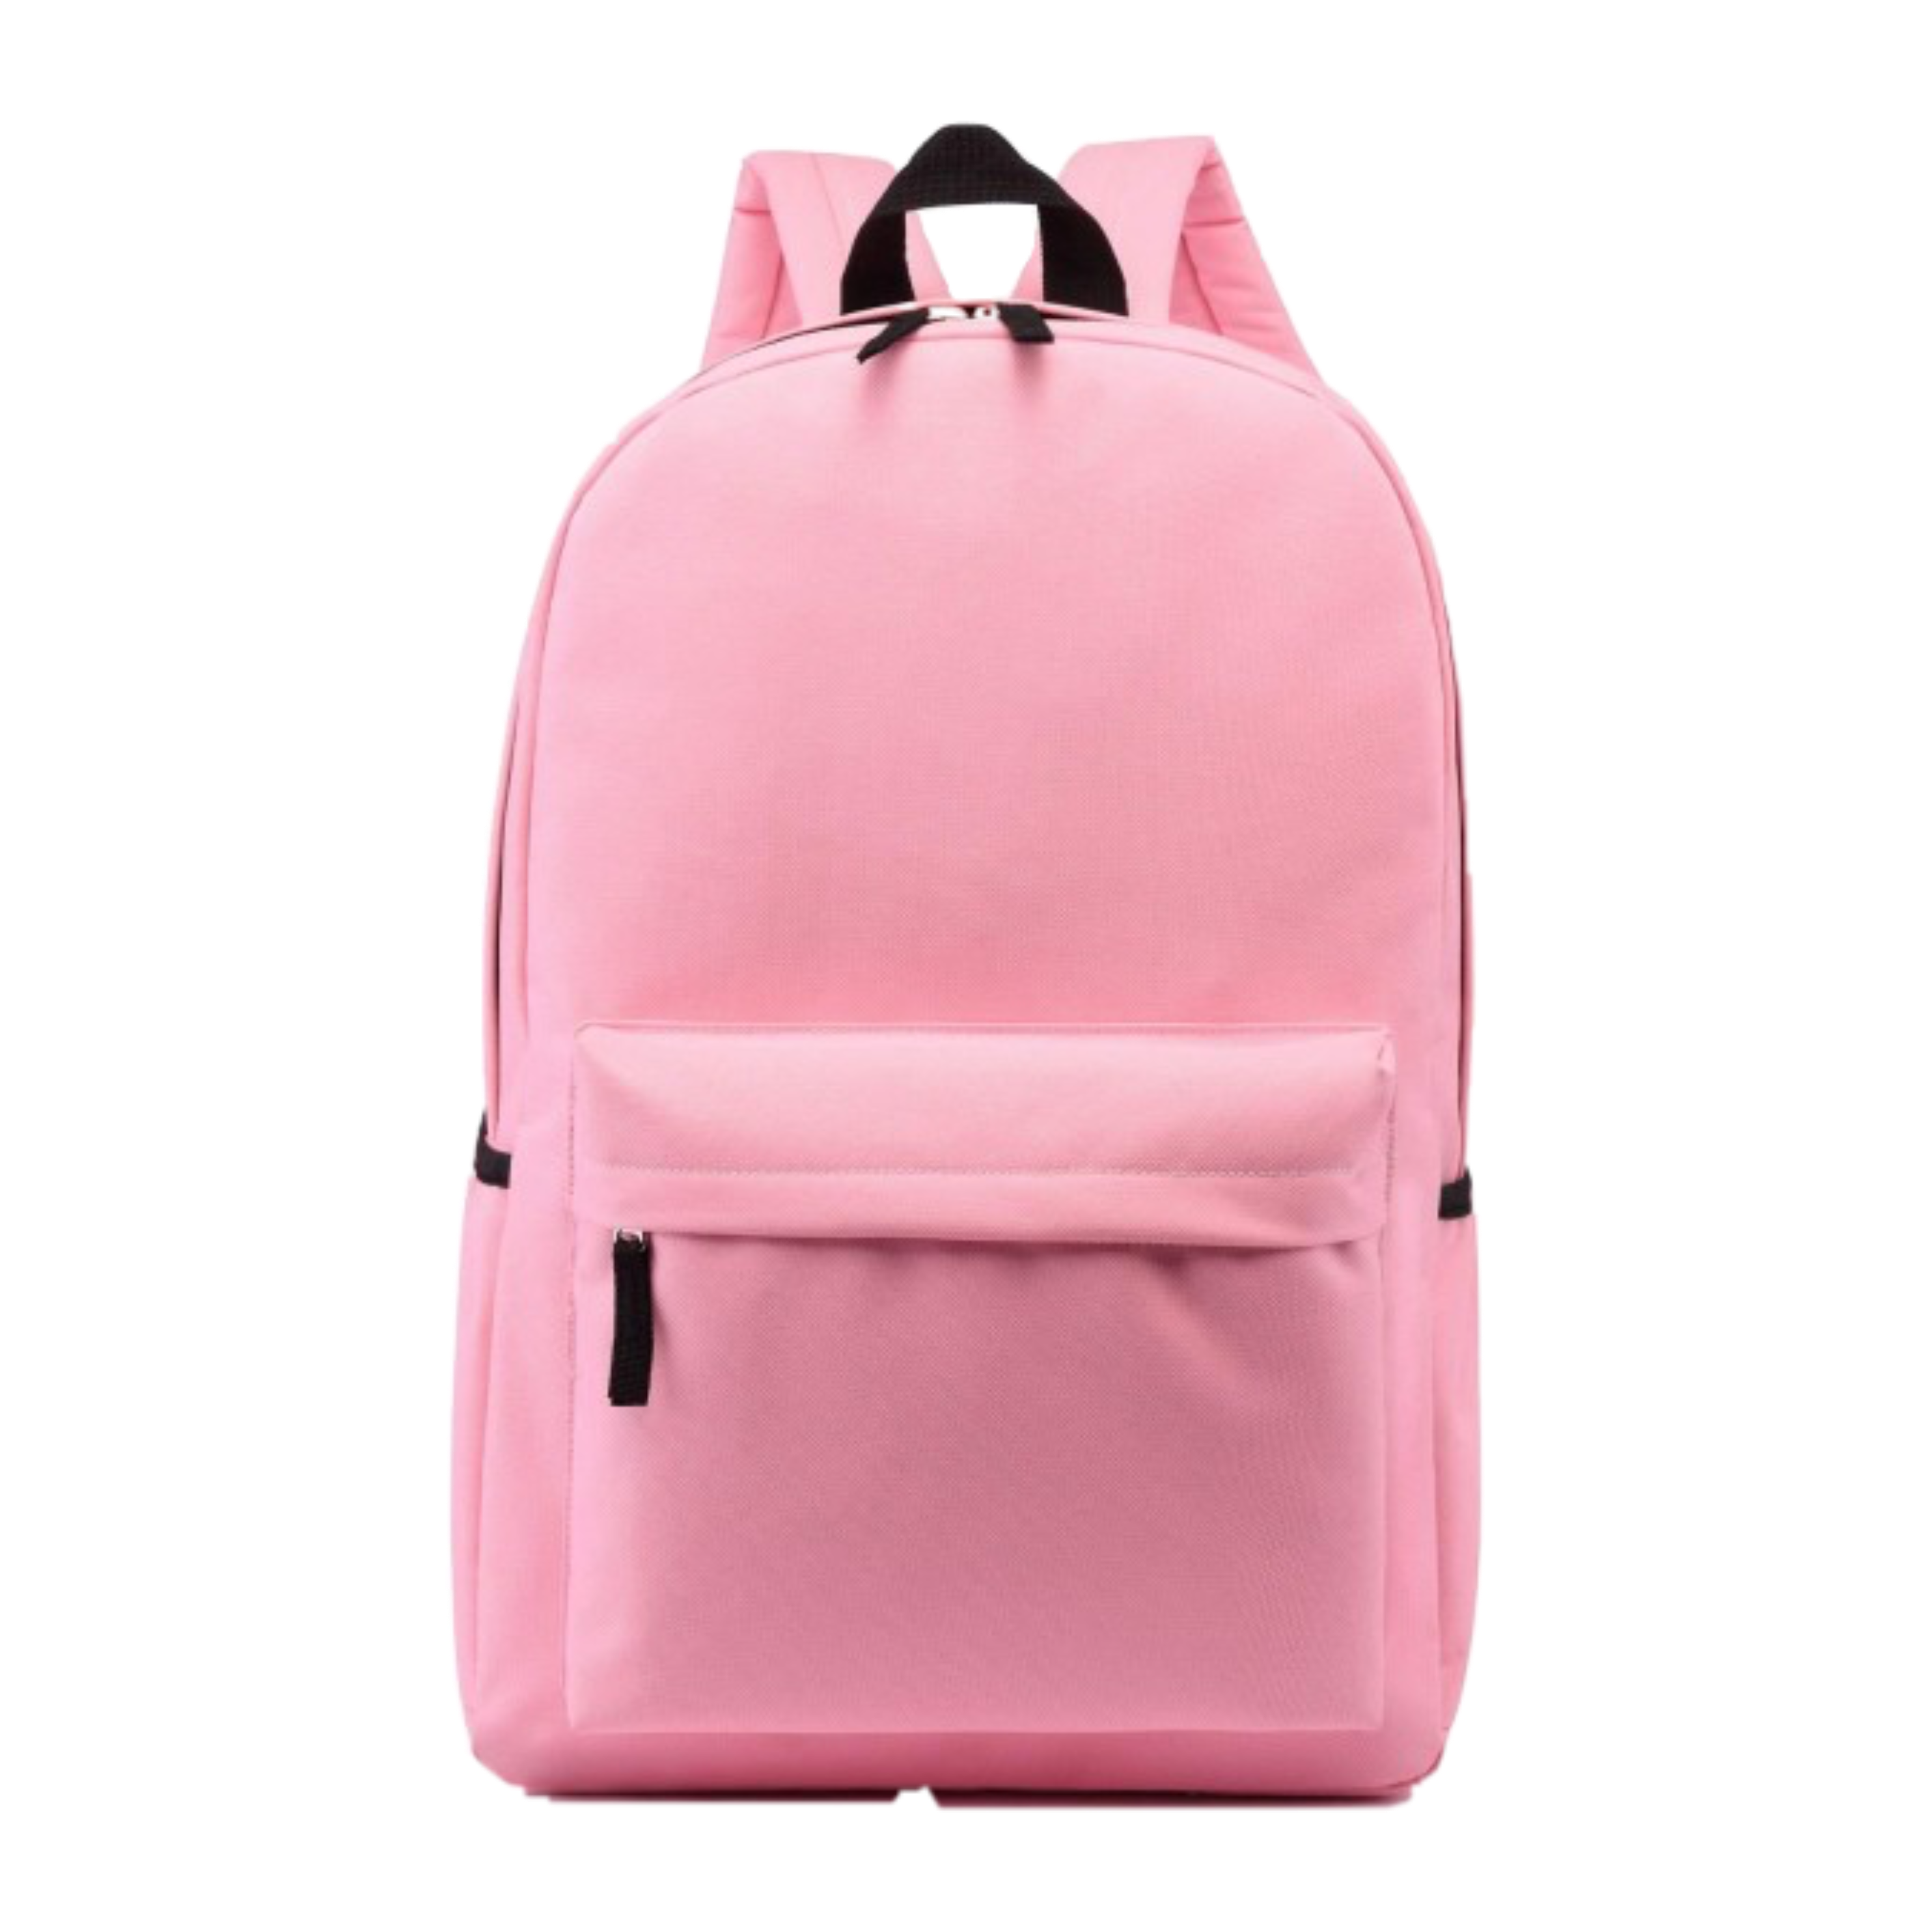 Backpack Pink Aesthetic School Bag Sticker By Lily